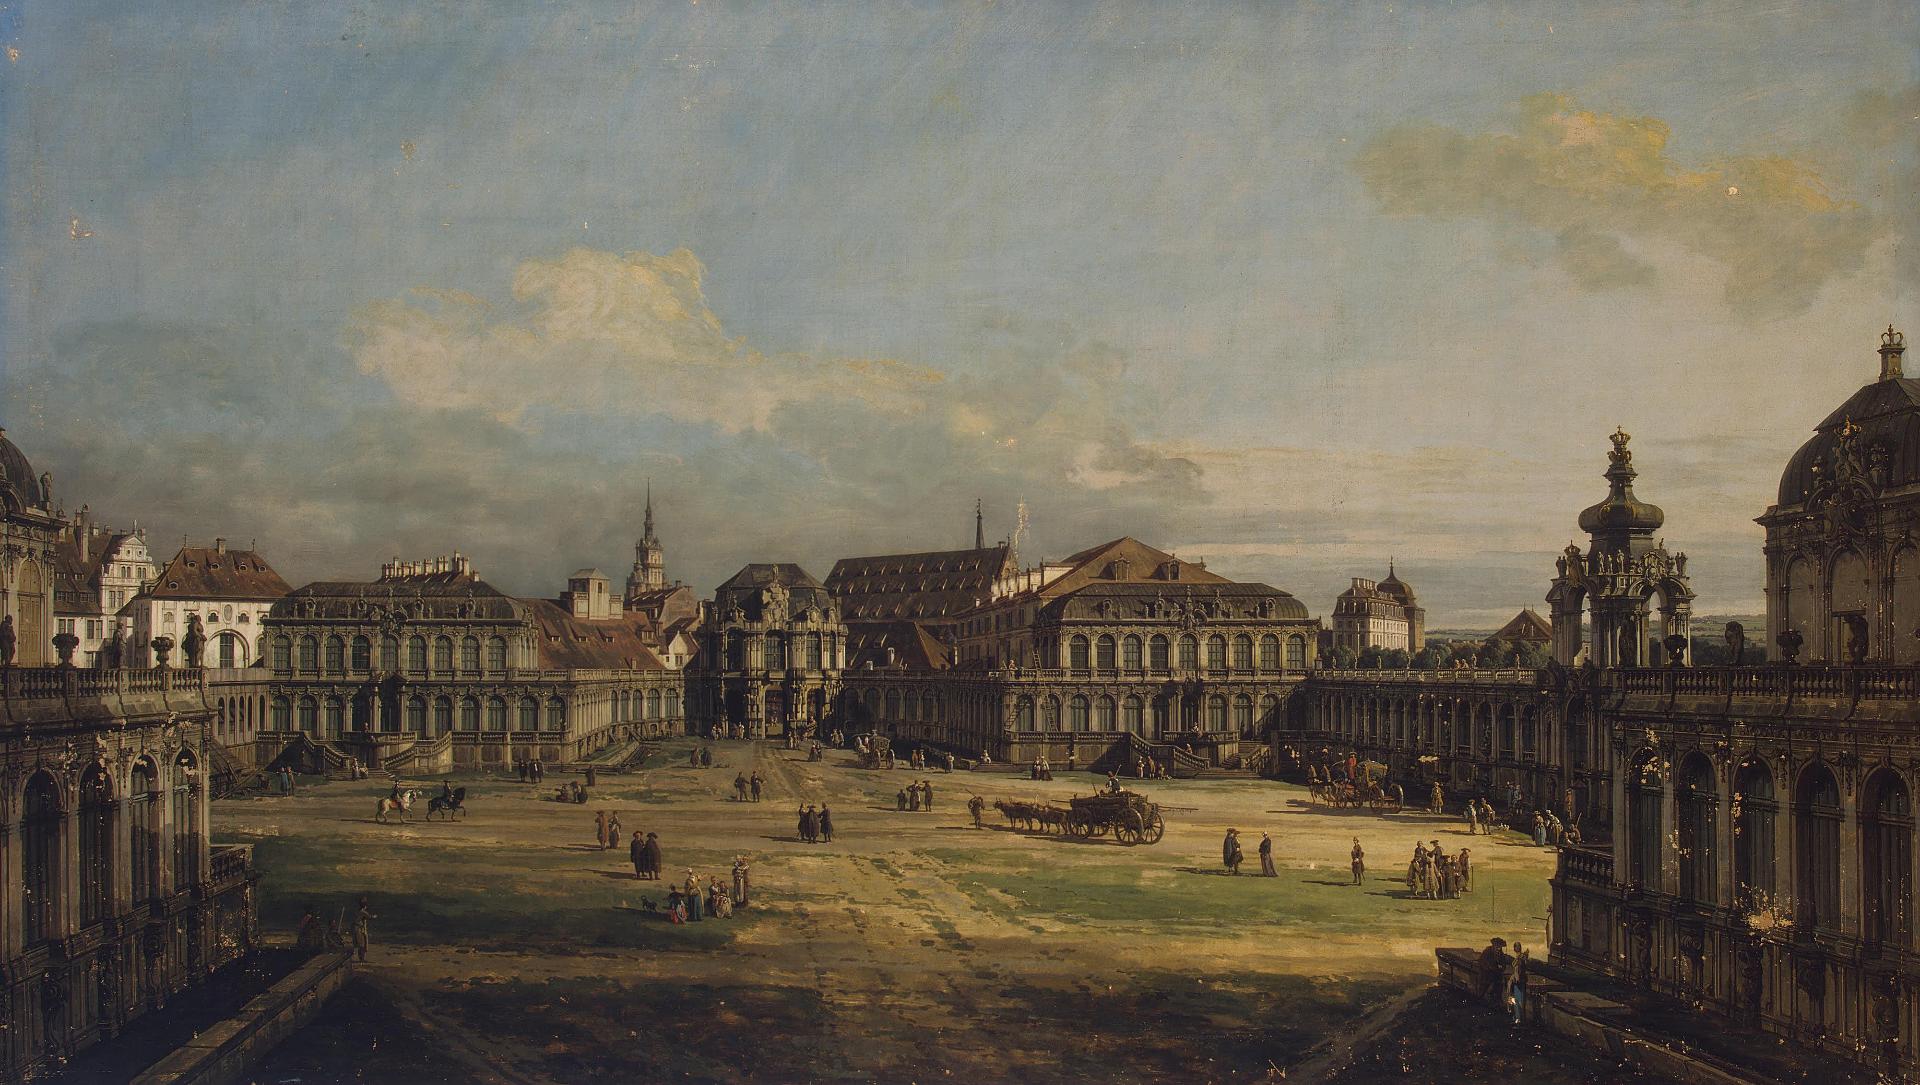 Bernardo Bellotto, Zwinger in Dresden, Italy, 1752, oil on canvas, 131x233 cm, State Hermitage Museum, (Inventory Number: ГЭ-205).